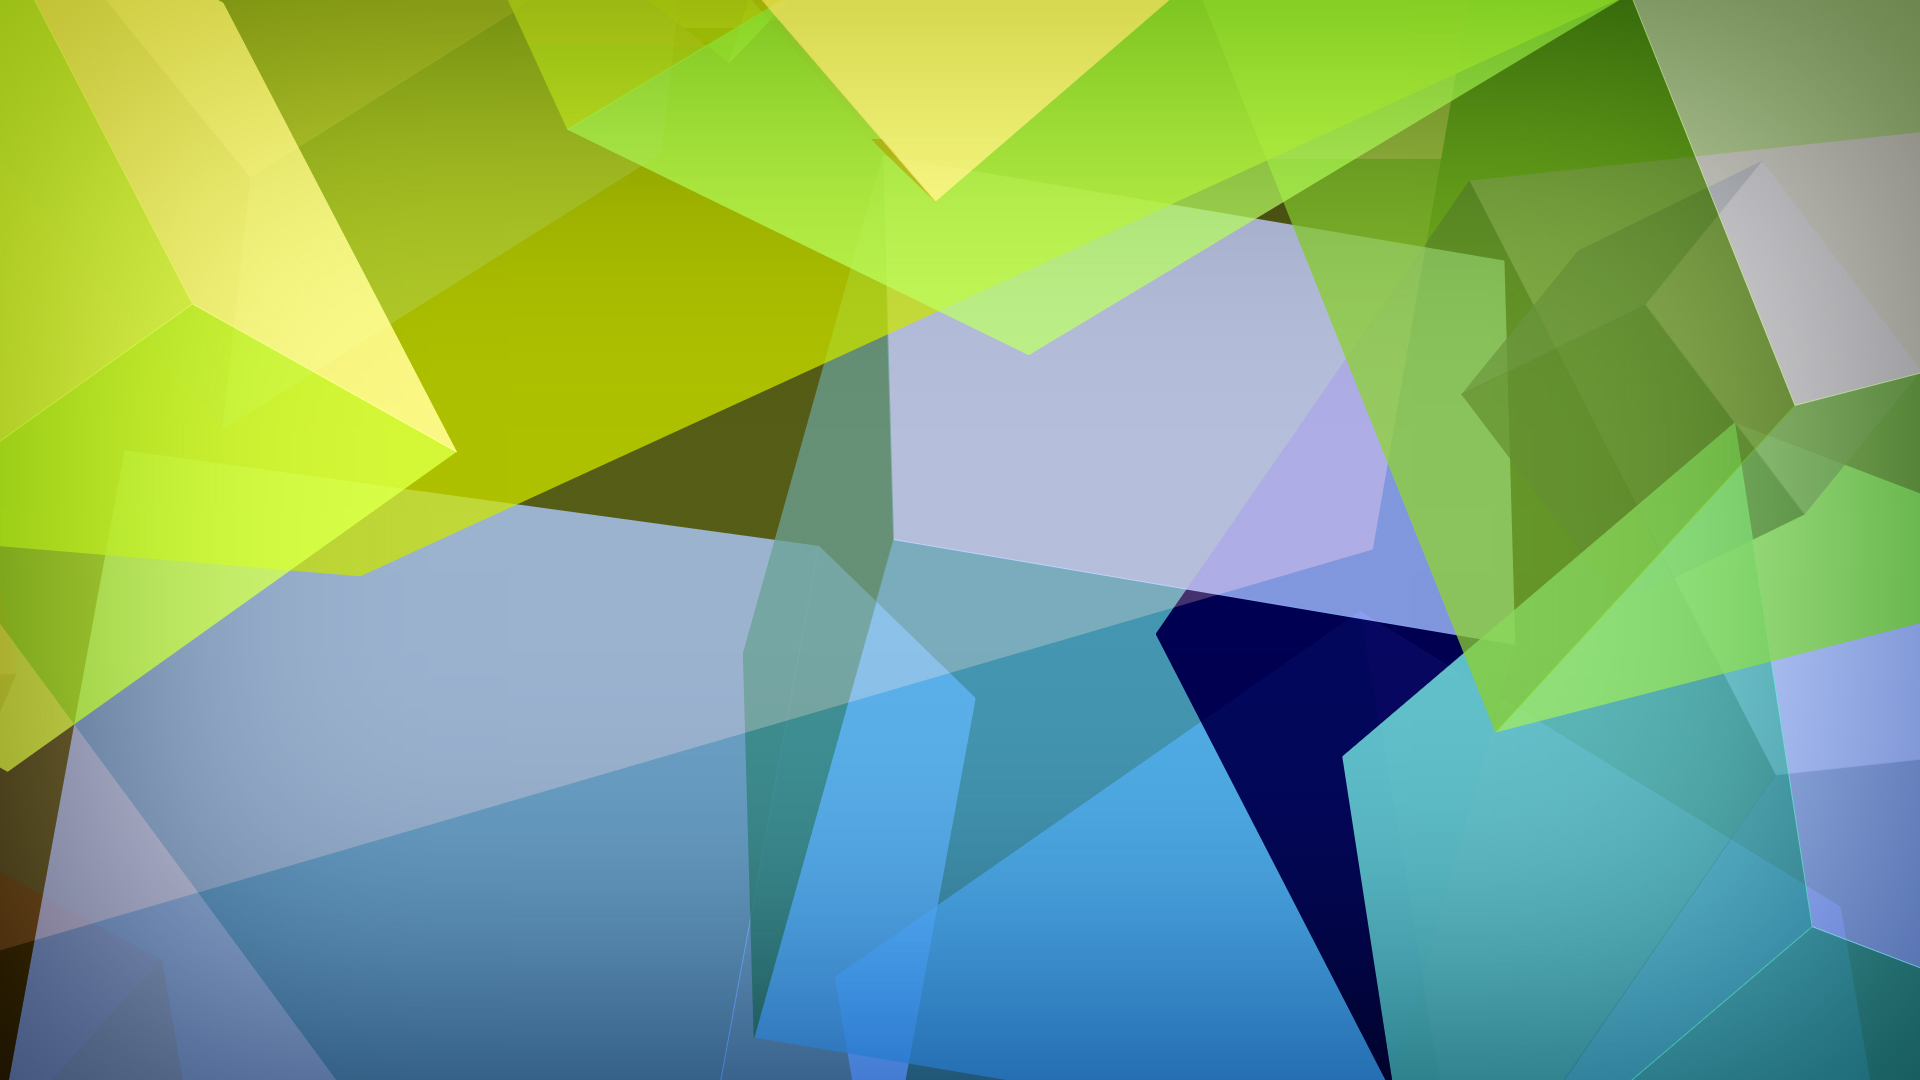  Abstract Geometric Colored Shapes desktop PC and Mac wallpaper 1920x1080